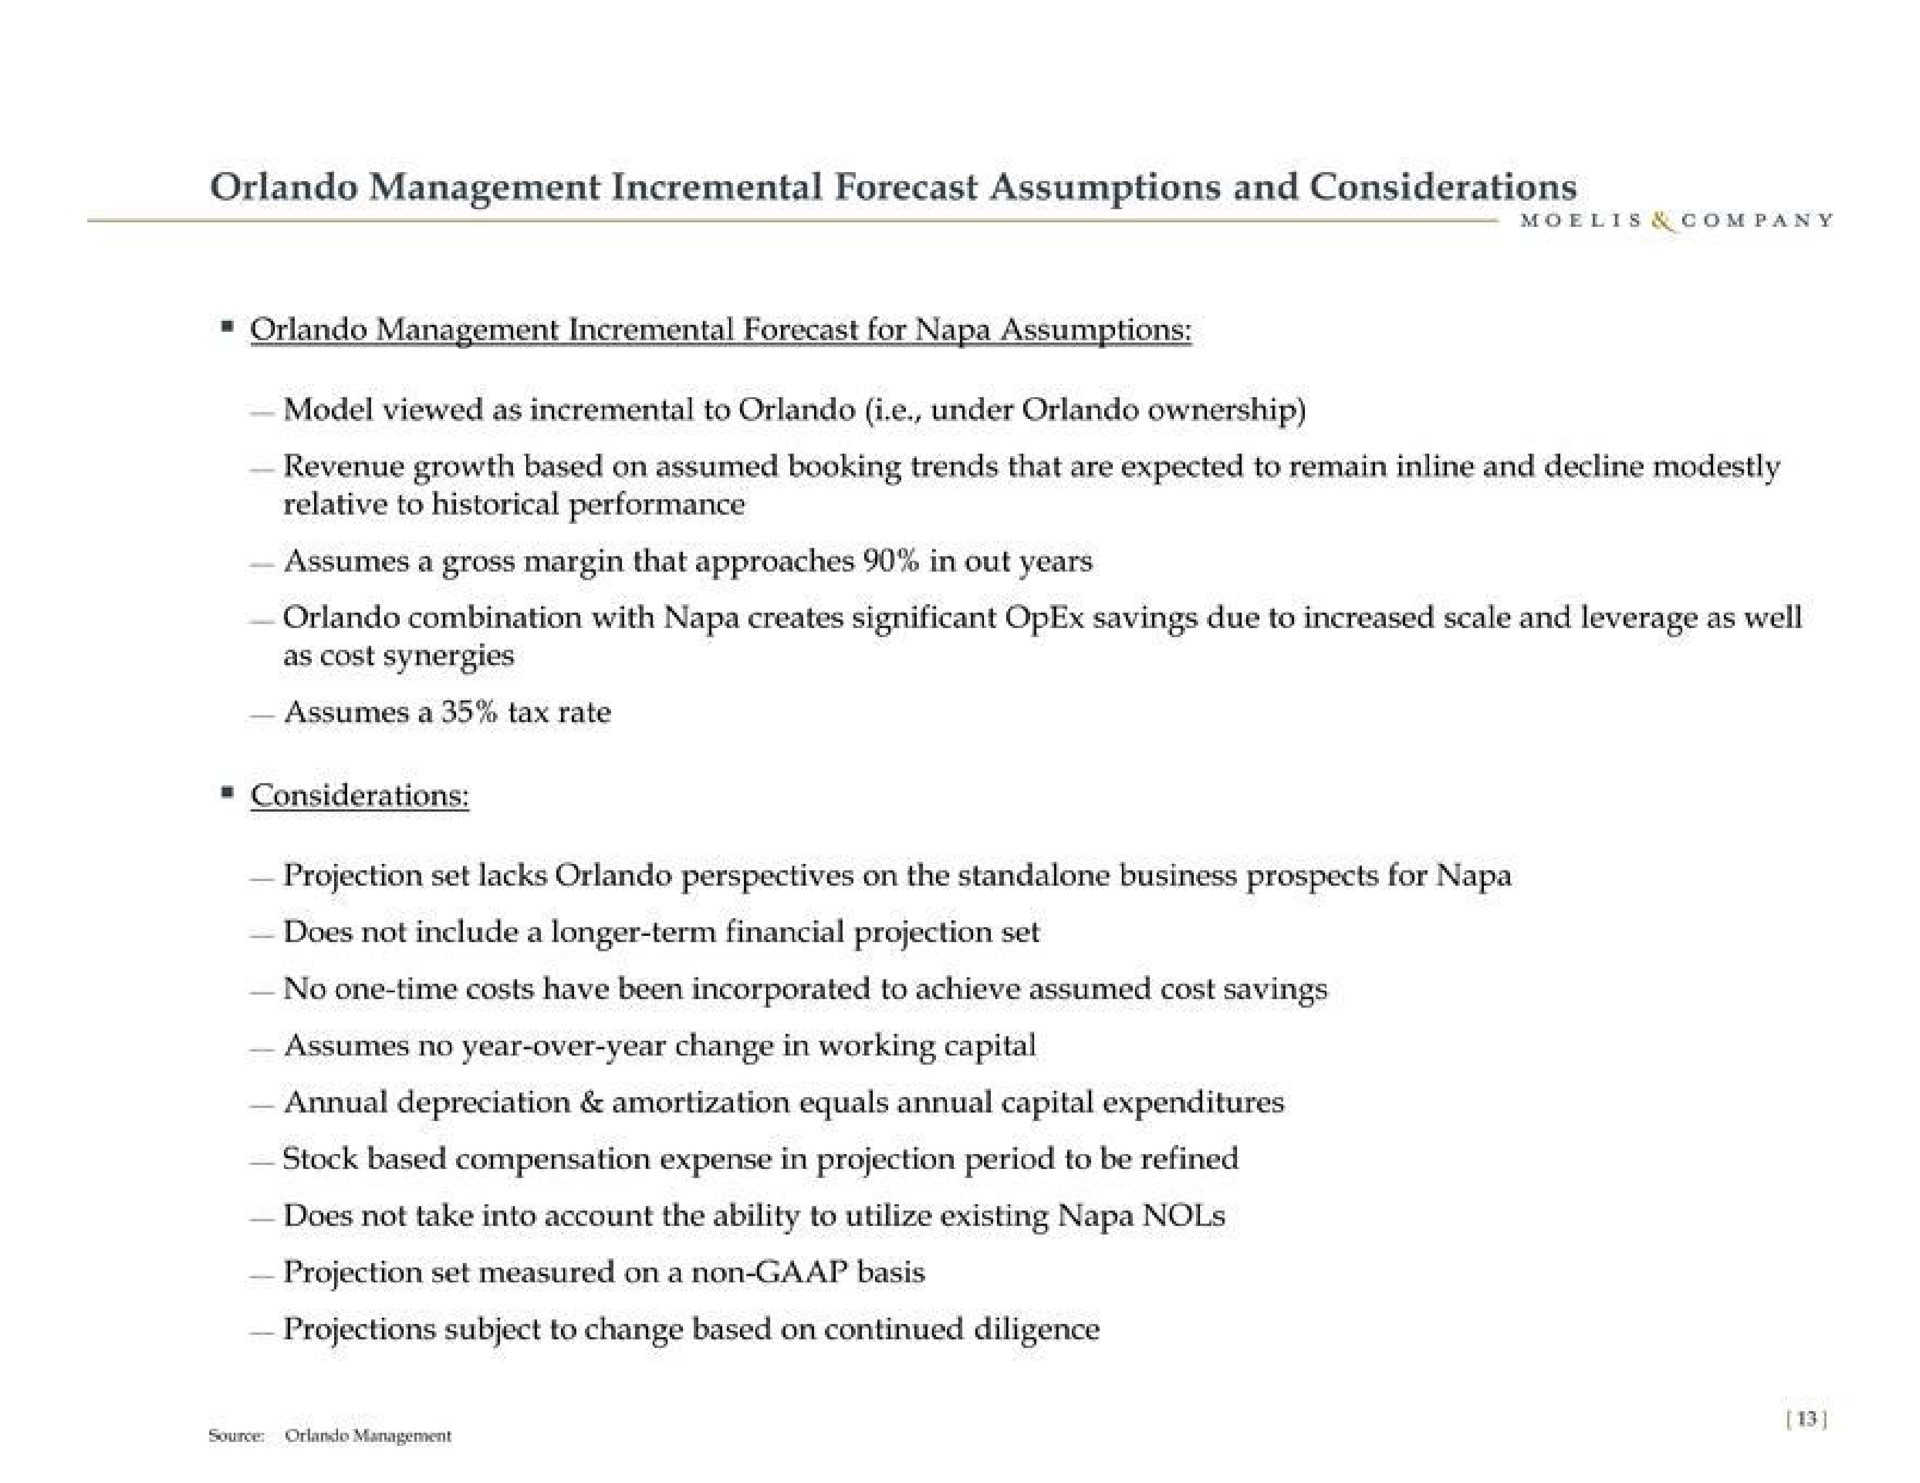 management incremental forecast assumptions and considerations management incremental forecast for napa assumptions revenue growth based on assumed booking trends that are expected to remain and decline modestly relative to historical performance combination with napa creates significant savings due to increased scale and leverage as well projection set lacks perspectives on the business prospects for napa does not include a longer term financial projection set no one time costs have been incorporated to achieve assumed cost savings assumes no year over year change in working capital annual depreciation amortization equals annual capital expenditures stock based compensation expense in projection period to be refined does not take into account the ability to utilize existing napa projection set measured on a non basis projections subject to change based on continued diligence | Moelis & Company